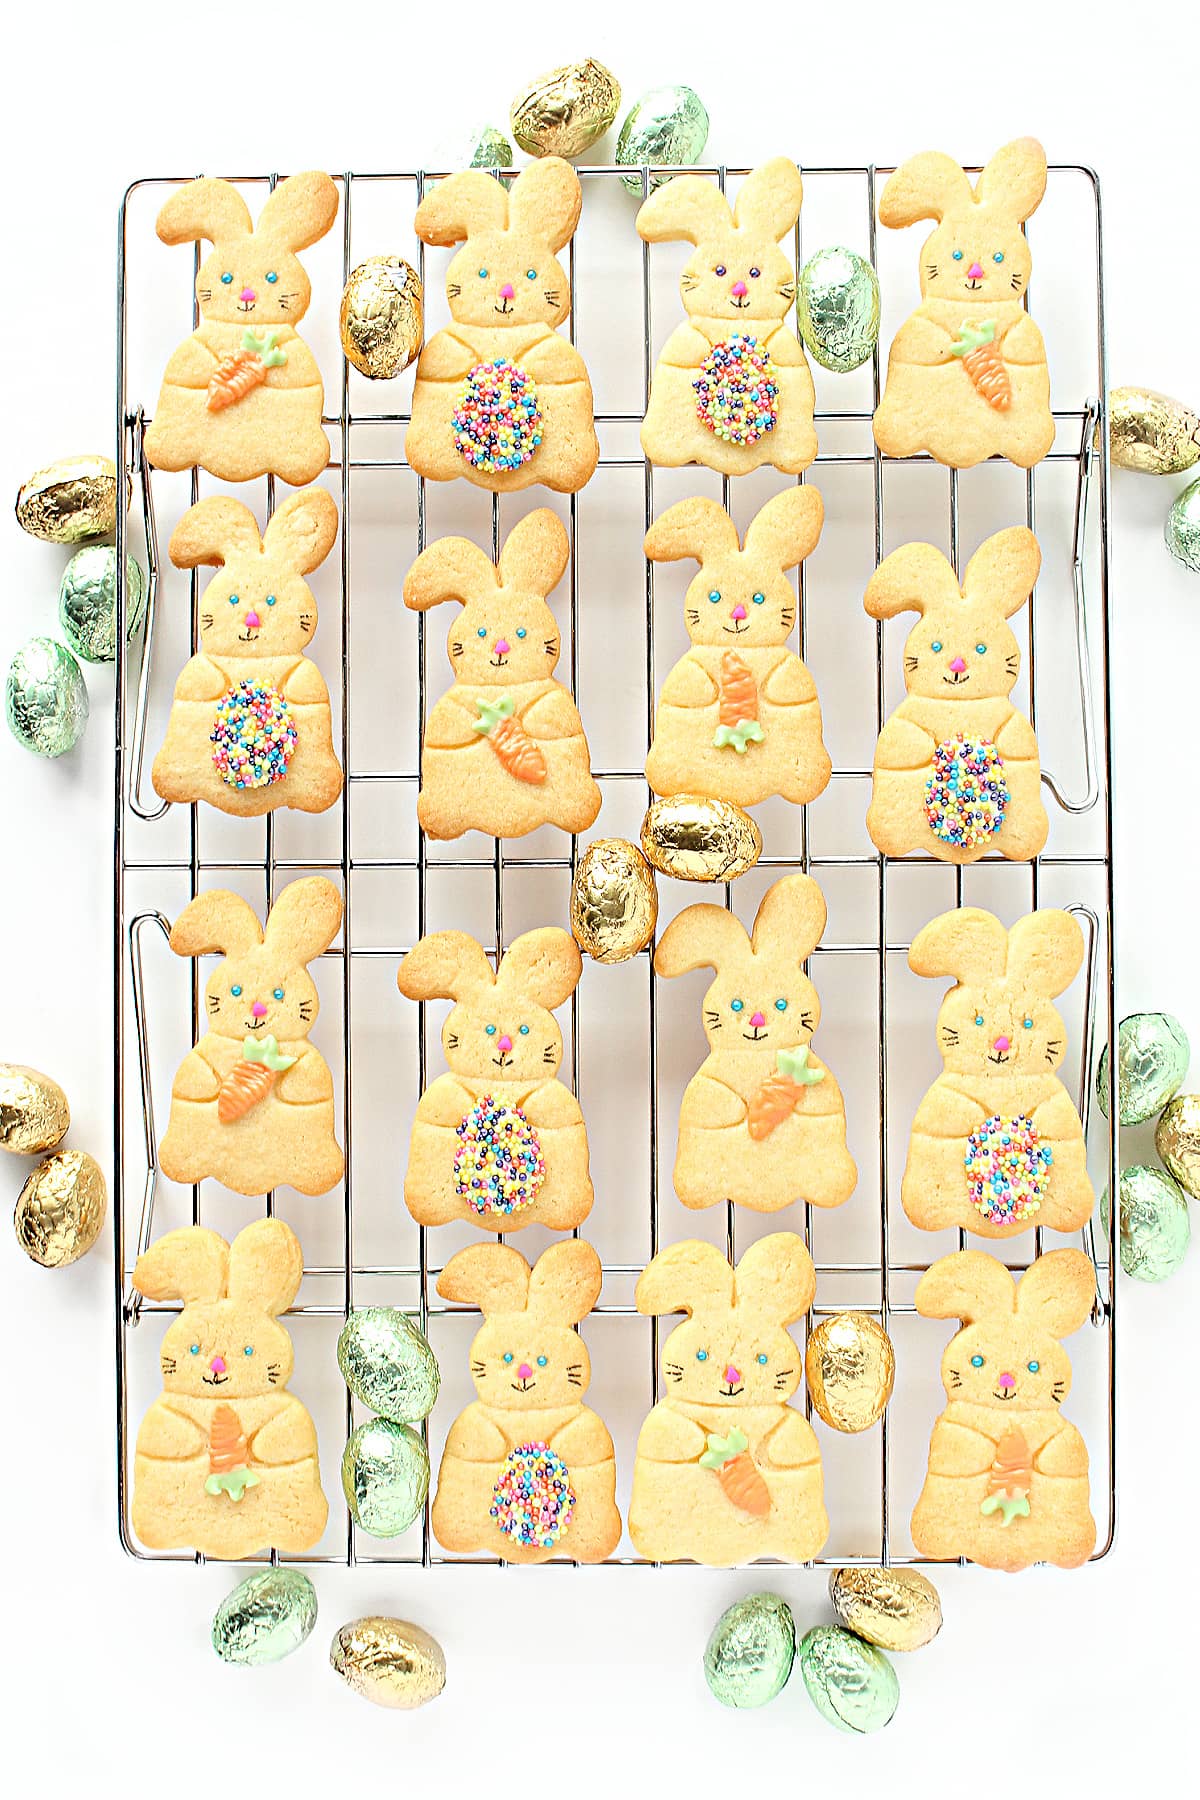 Cutout Bunny Cookies decorated with candy melt carrots or Easter Eggs.